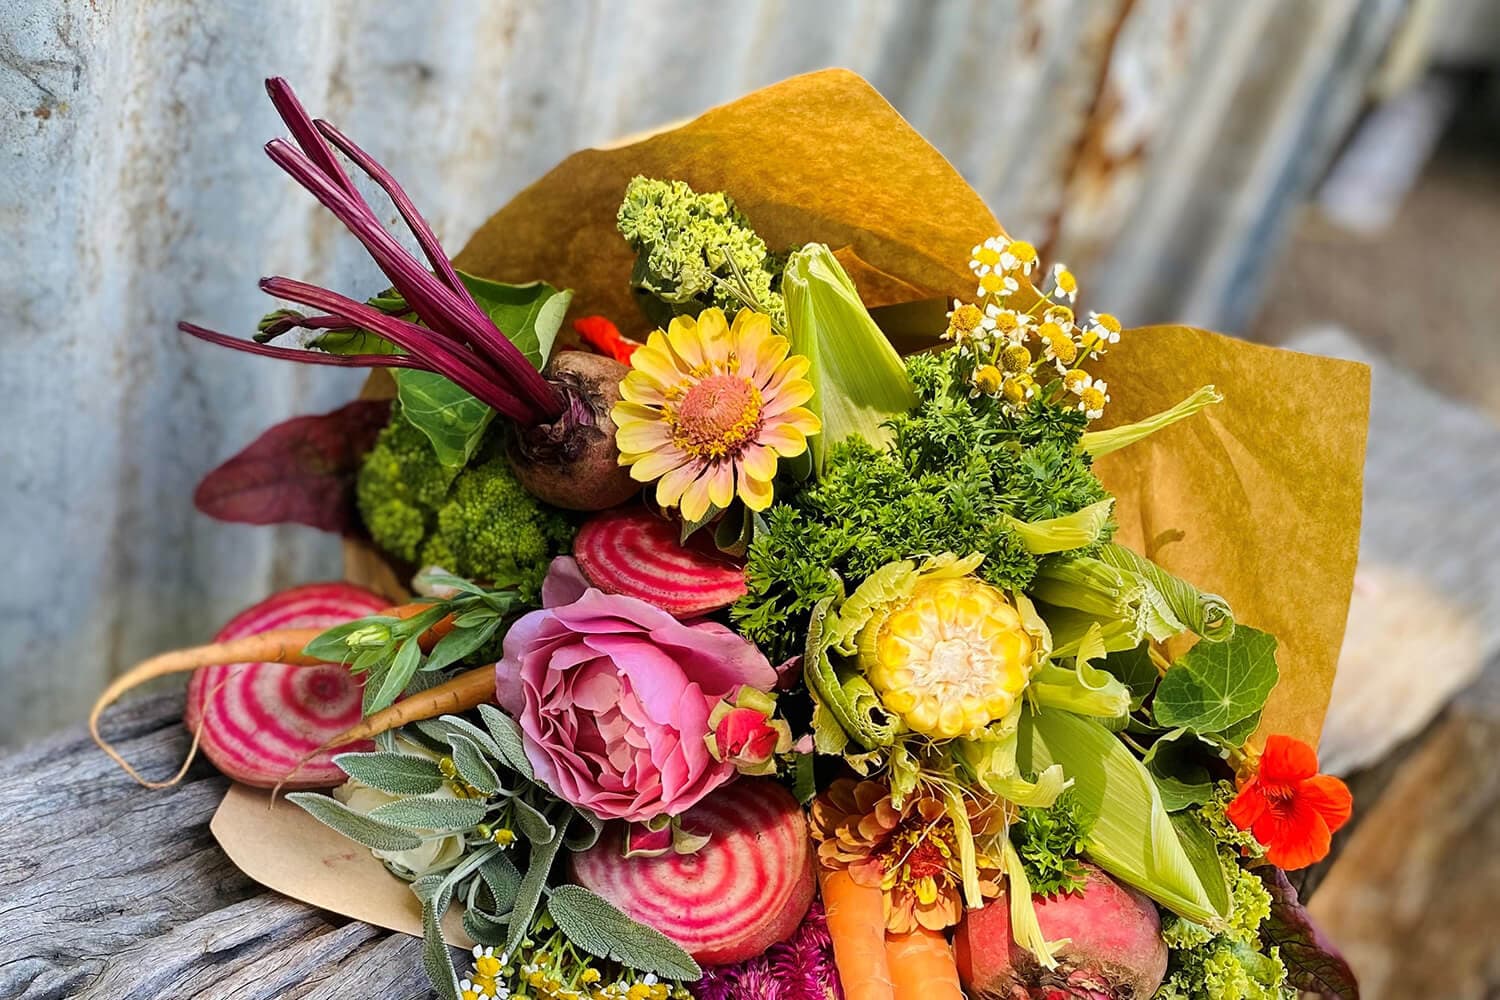 Make your own vegetable bouquet